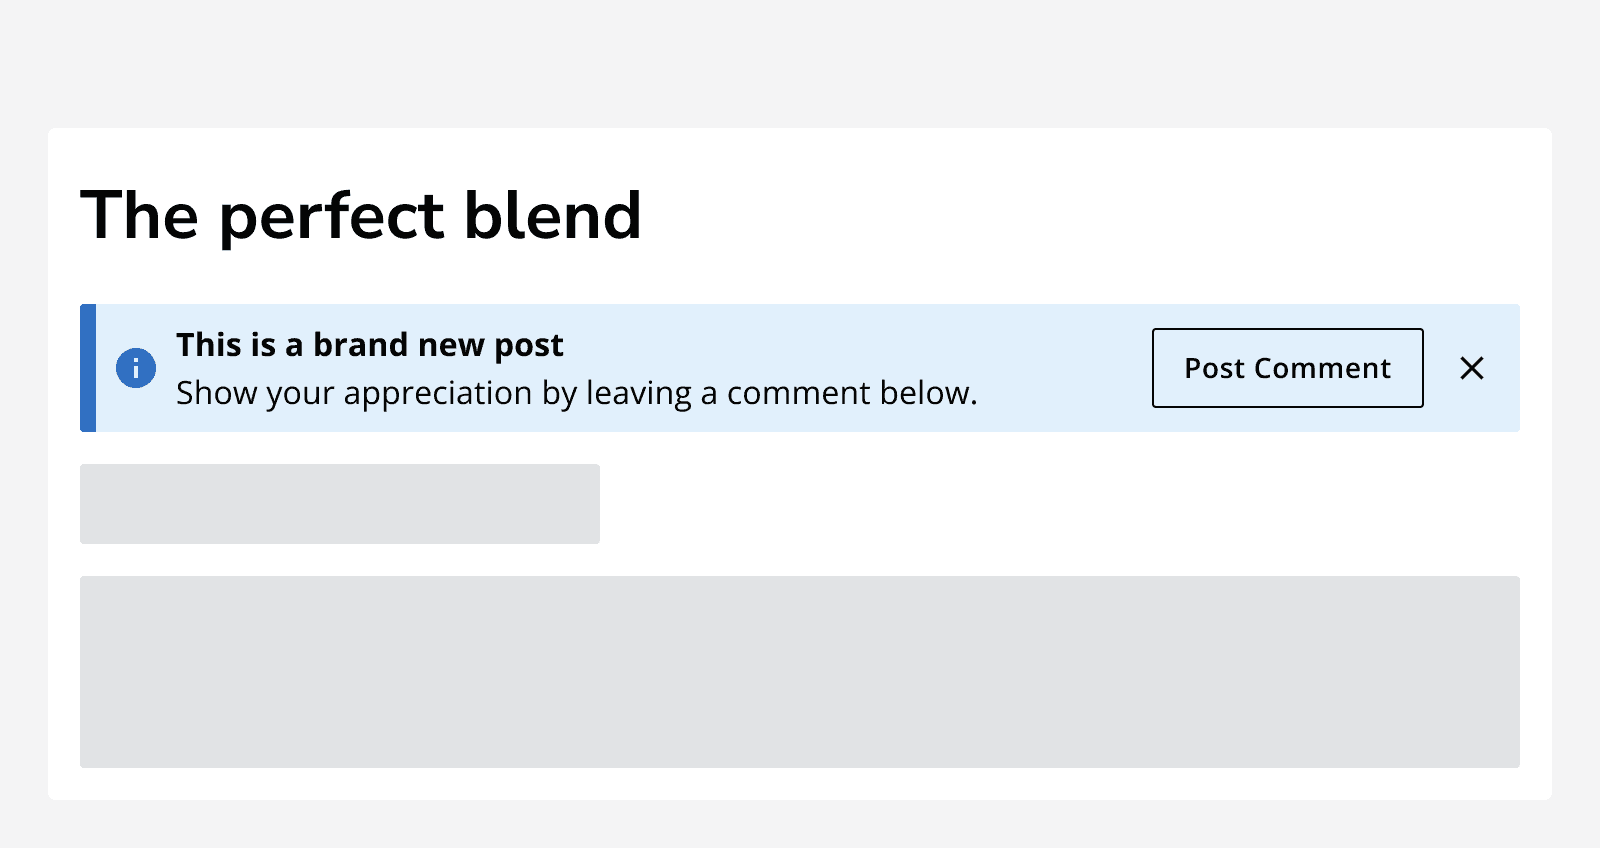 An article titled ‘The perfect blend’ showing an information alert with an action button that says ‘Post comment’ and a dismiss button. The alert message says ‘This is a brand new post. Show your appreciation by leaving a comment below.